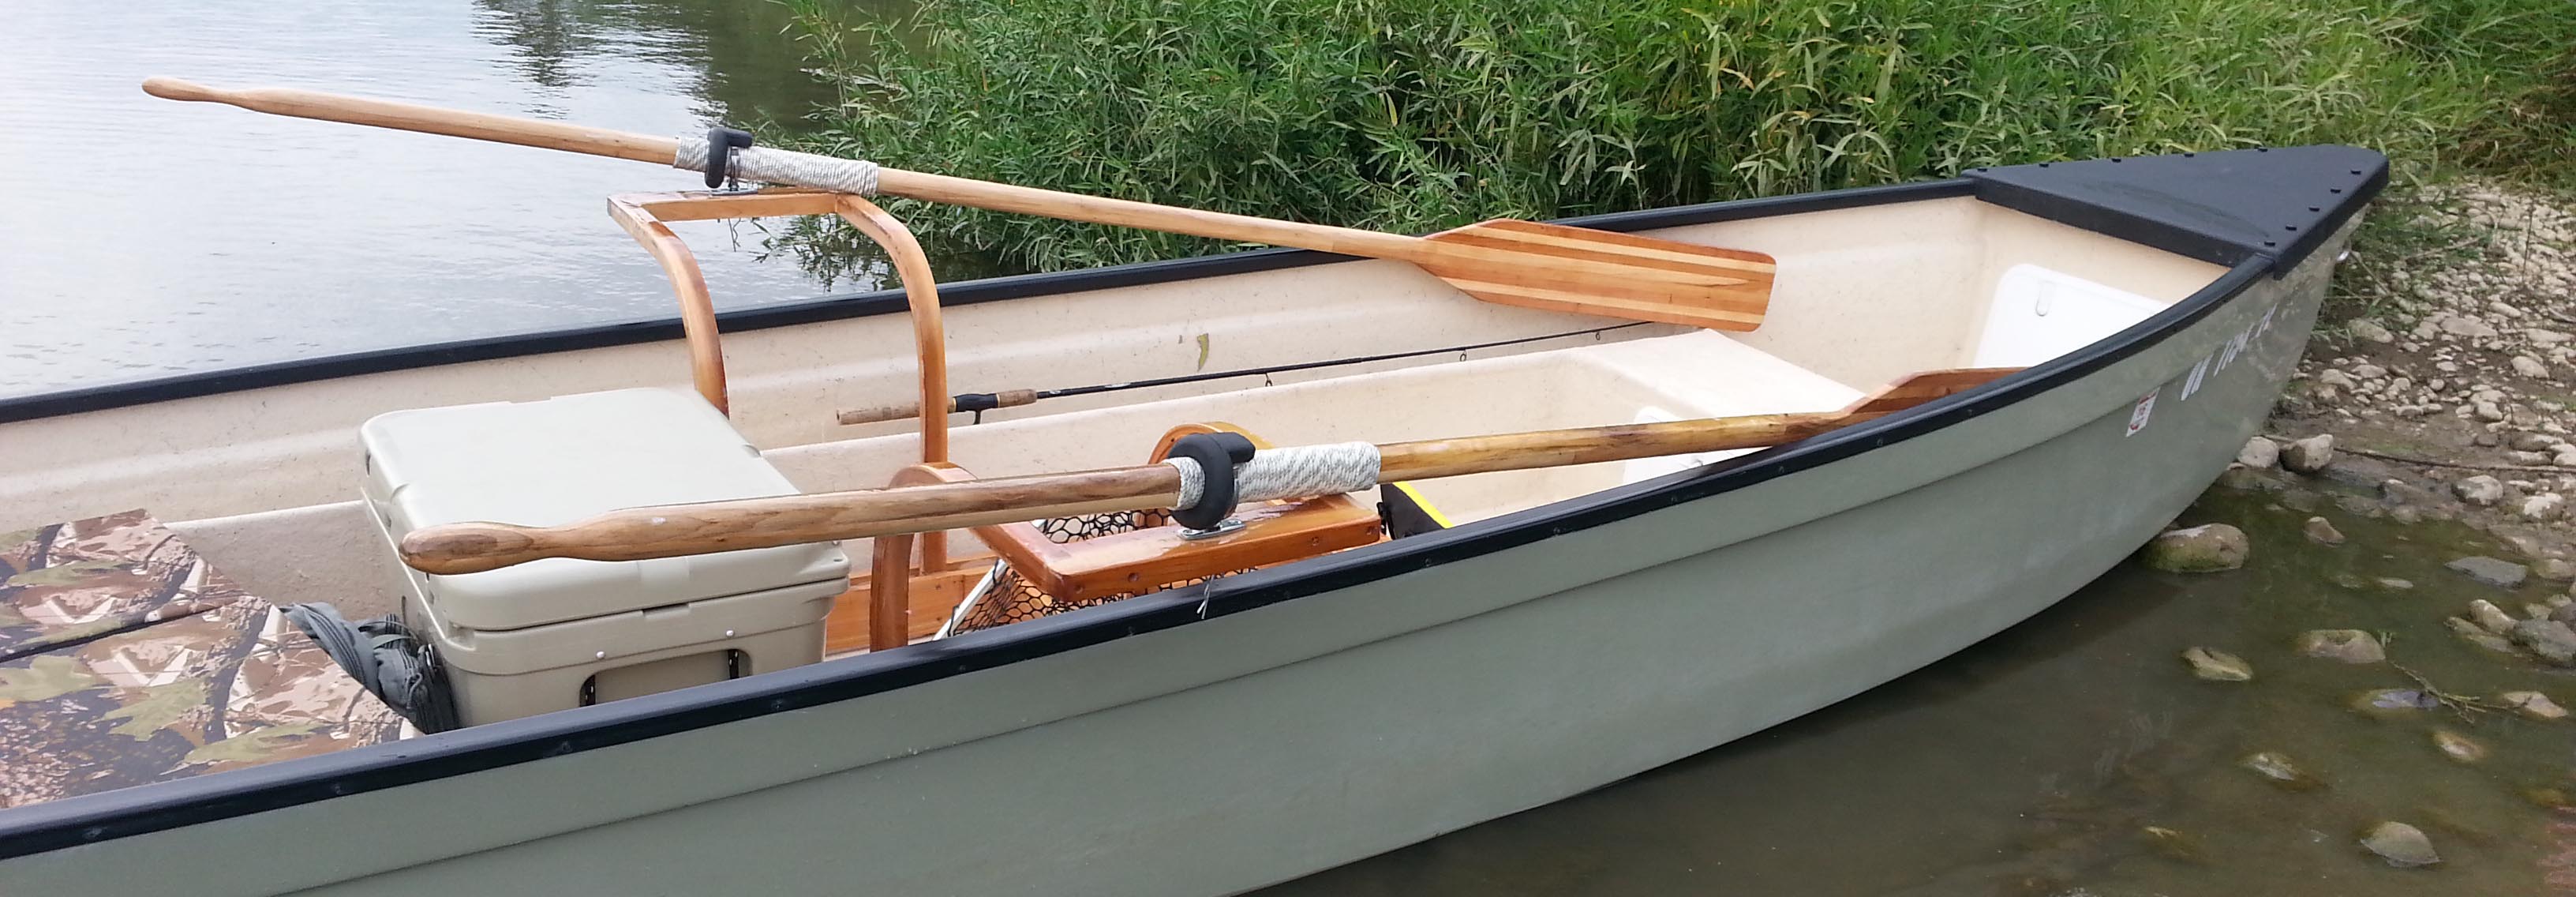 A wooden rowing frame and matching oars for a Towee – it ...